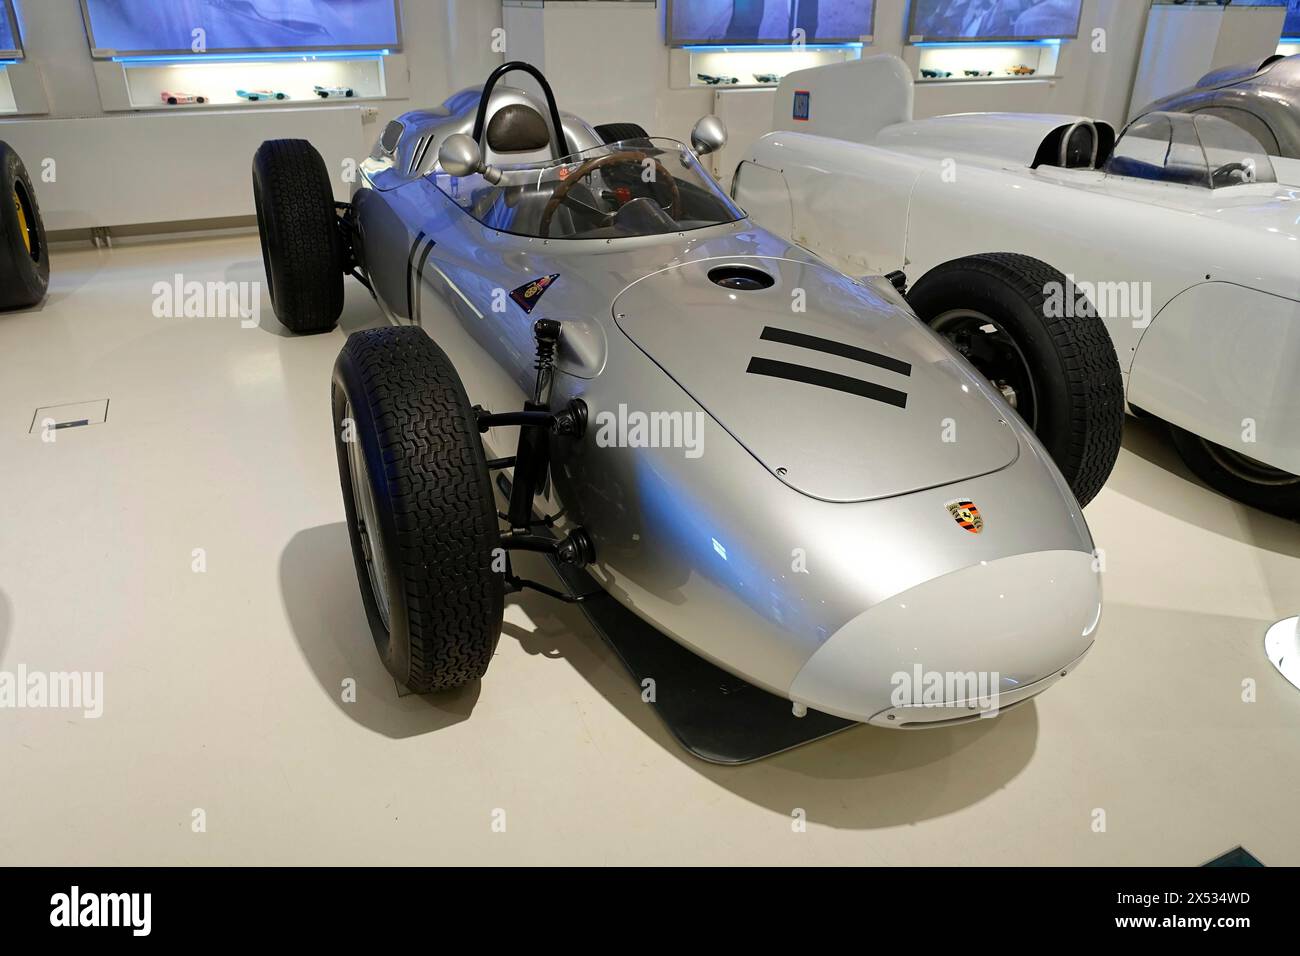 PORSCHE 718 -2 FORMULA 1, Historic Porsche formula car in an automobile museum from the single-seater category, AUTOMUSEUM PROTOTYP, Hamburg Stock Photo